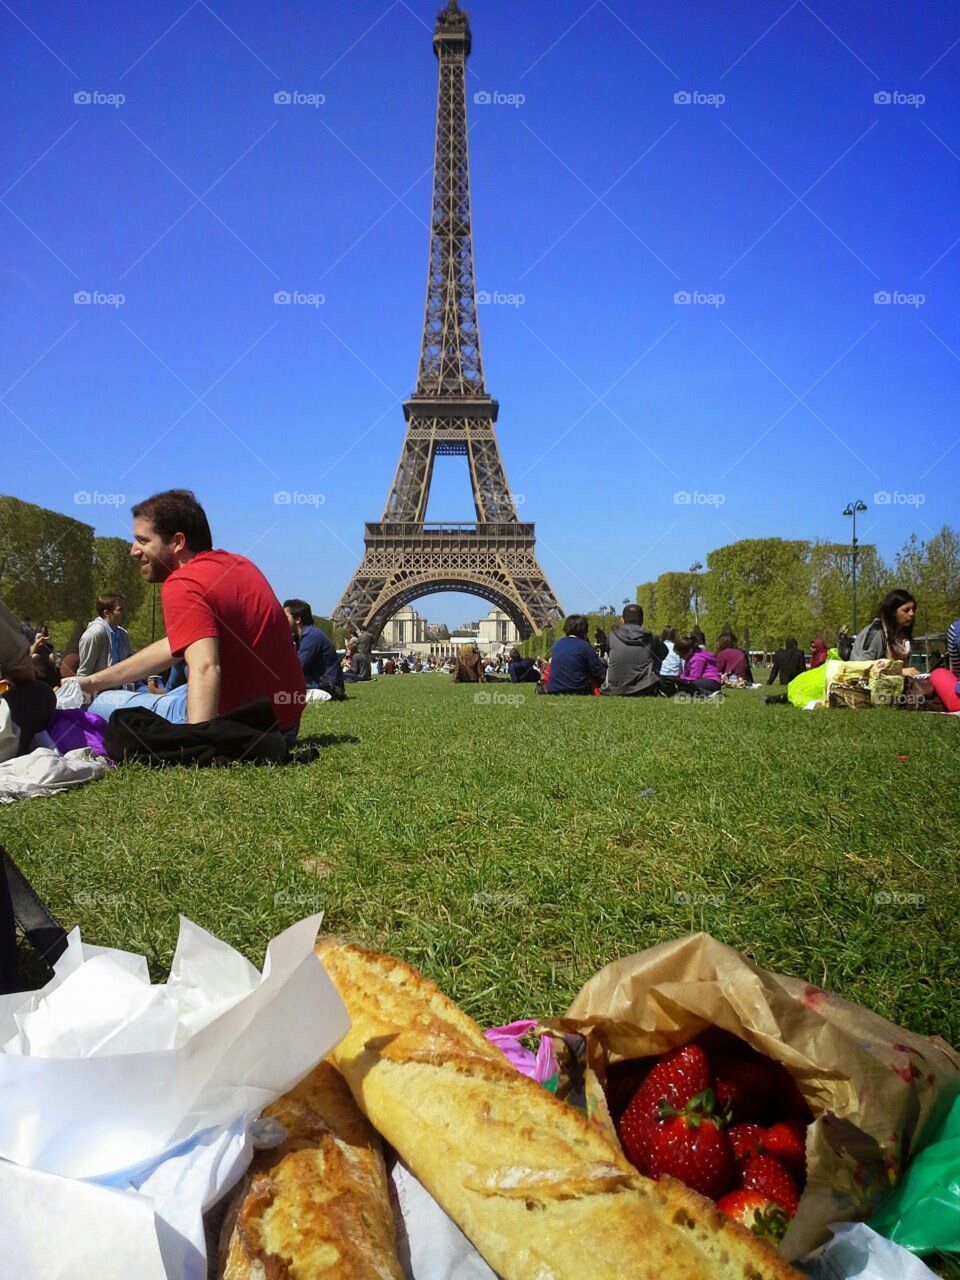 A little picnic by the Eiffel Tower